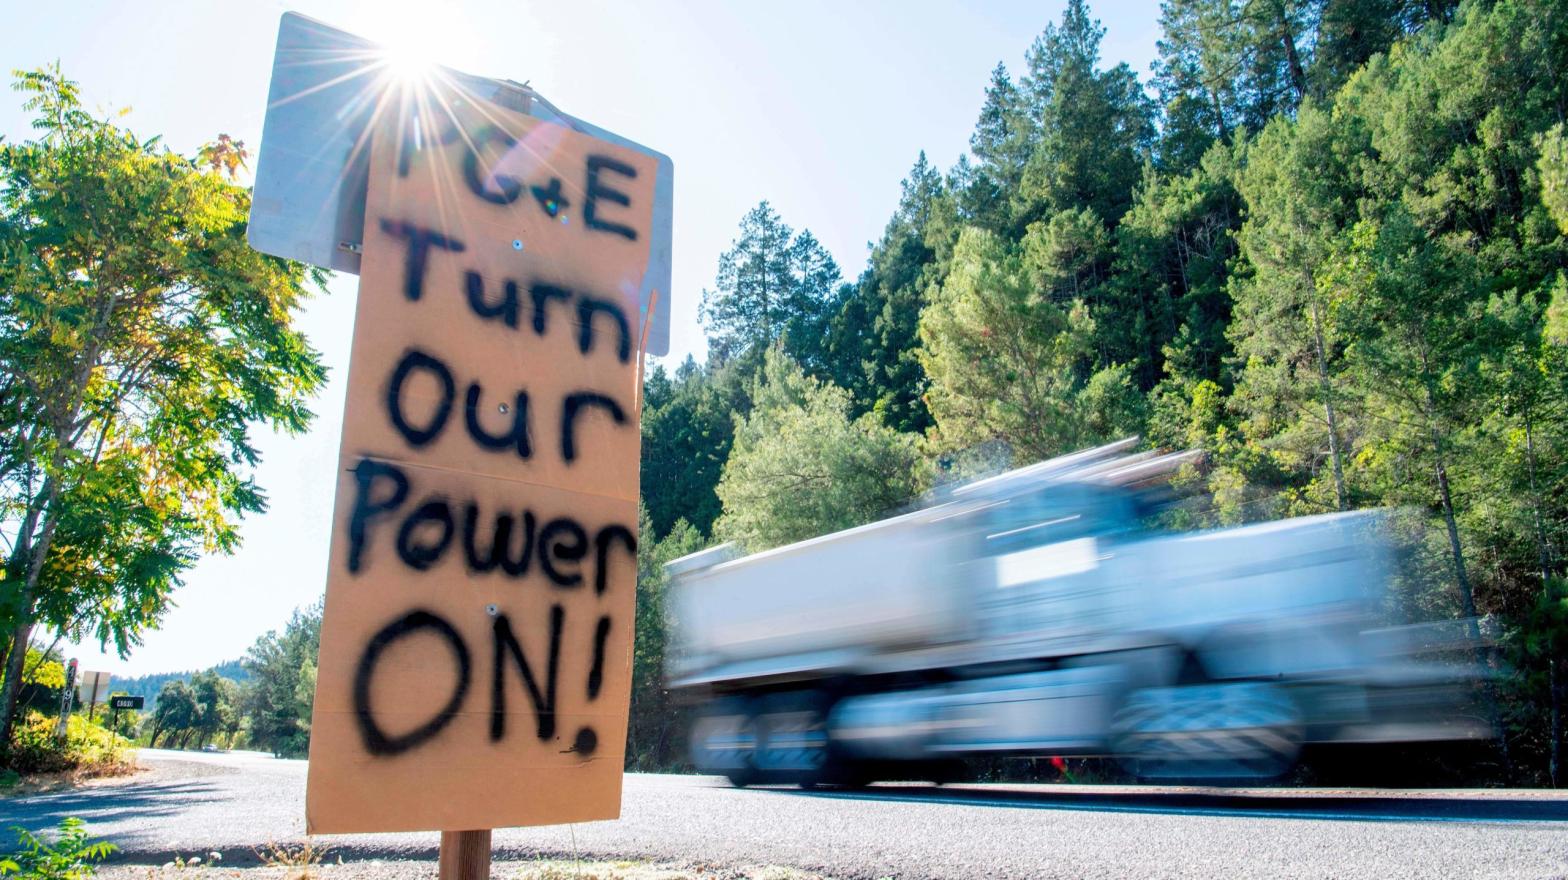 A sign calling for PG&E to turn the power back on is seen on the side of the road during a statewide blackout in Calistoga, California, on October, 10, 2019  (Photo: Josh Edelson , Getty Images)